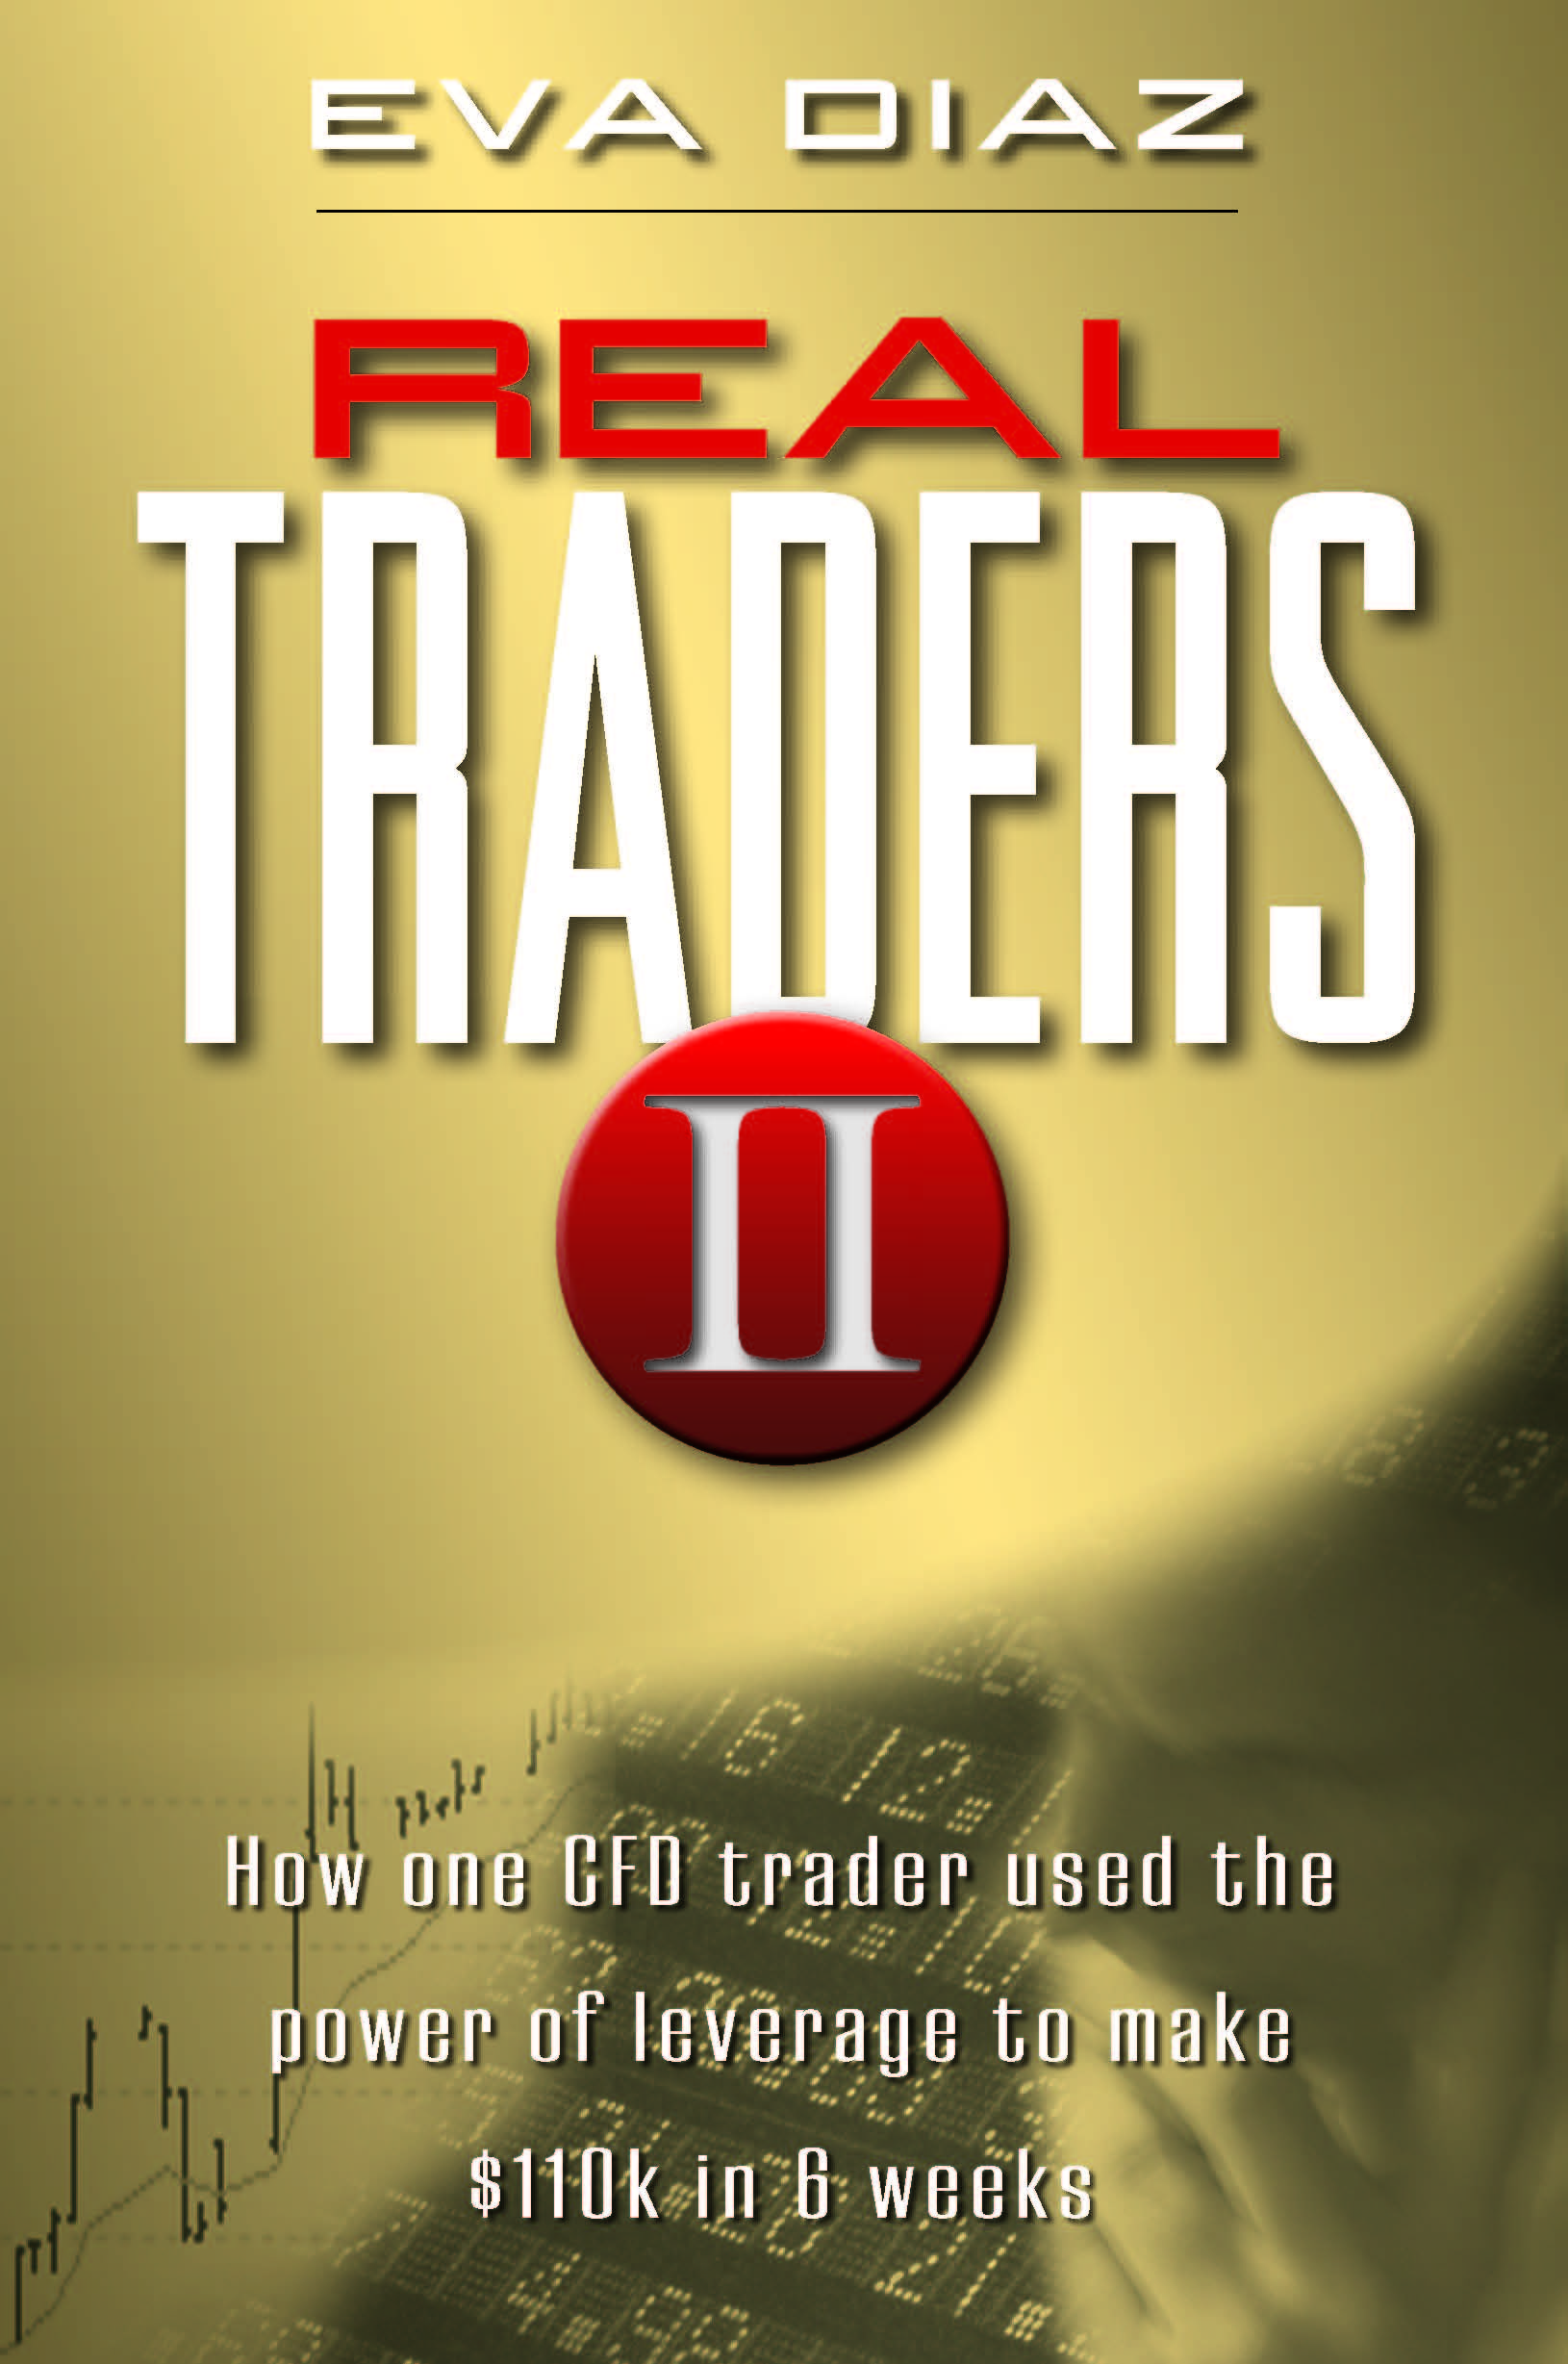 Diaz, Eva - Real Traders II: How One CFO Trader Used the Power of Leverage to make $110k in 9 Weeks, ebook